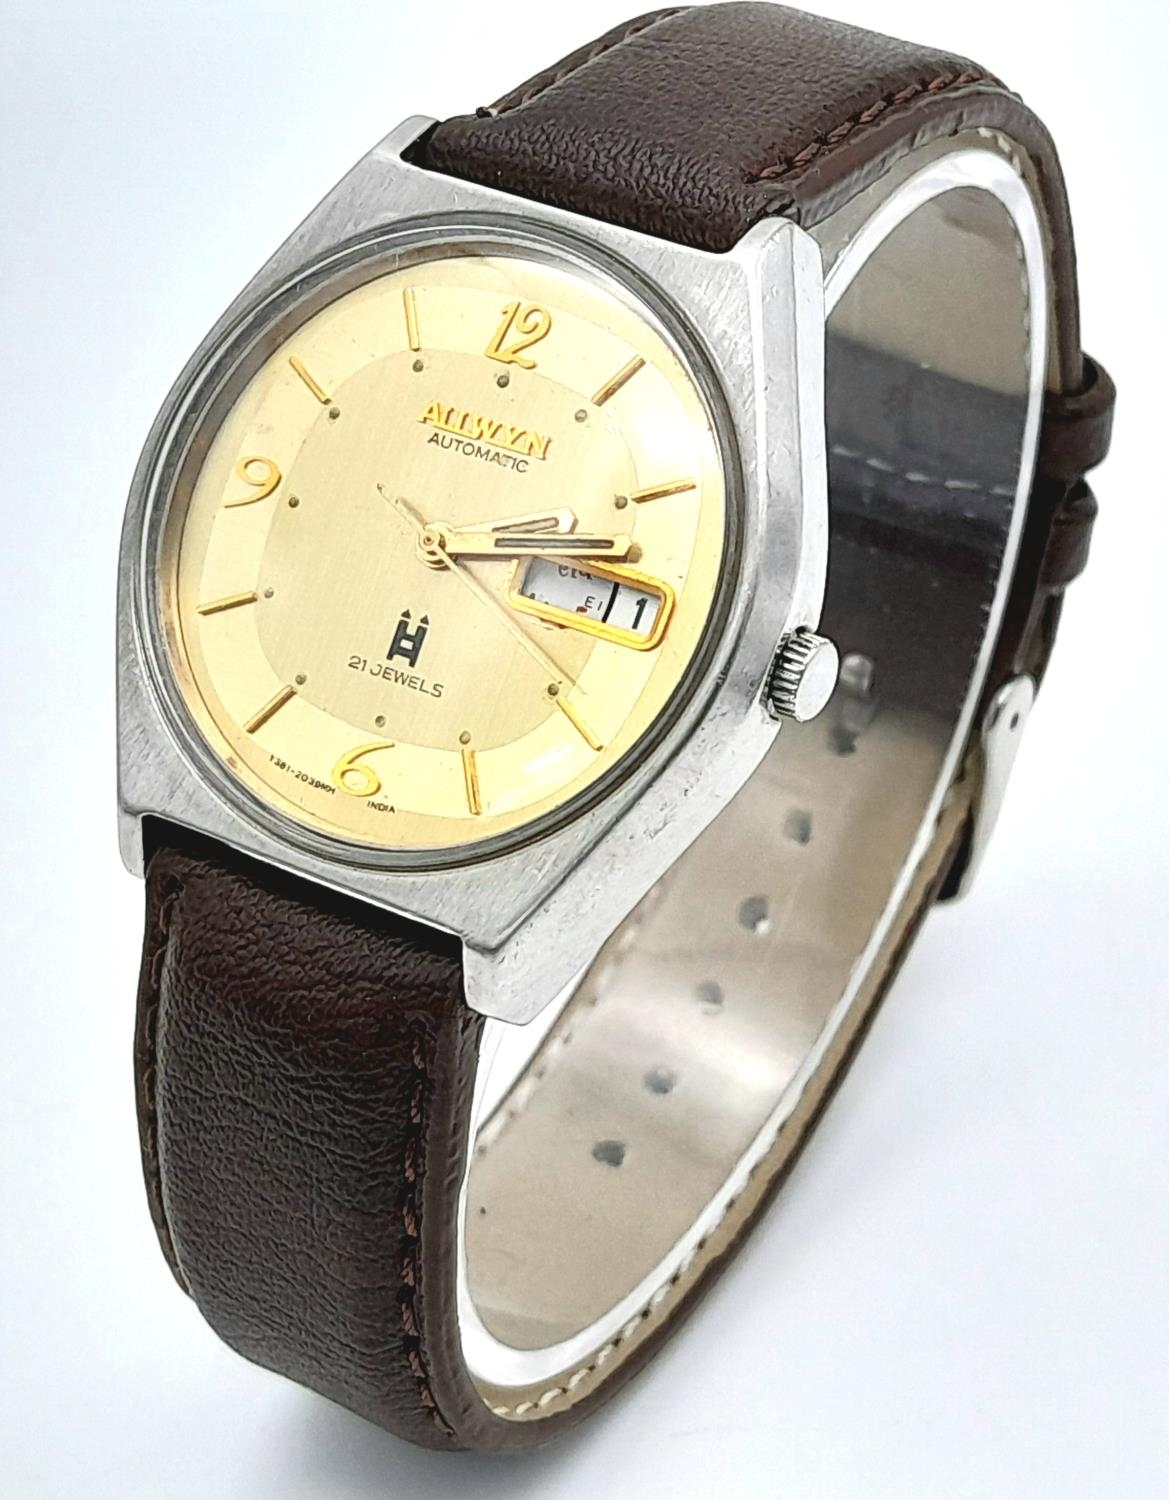 A Vintage Allwyn Automatic Gents Watch. Brown leather strap. Stainless steel case - 36mm. Yellow